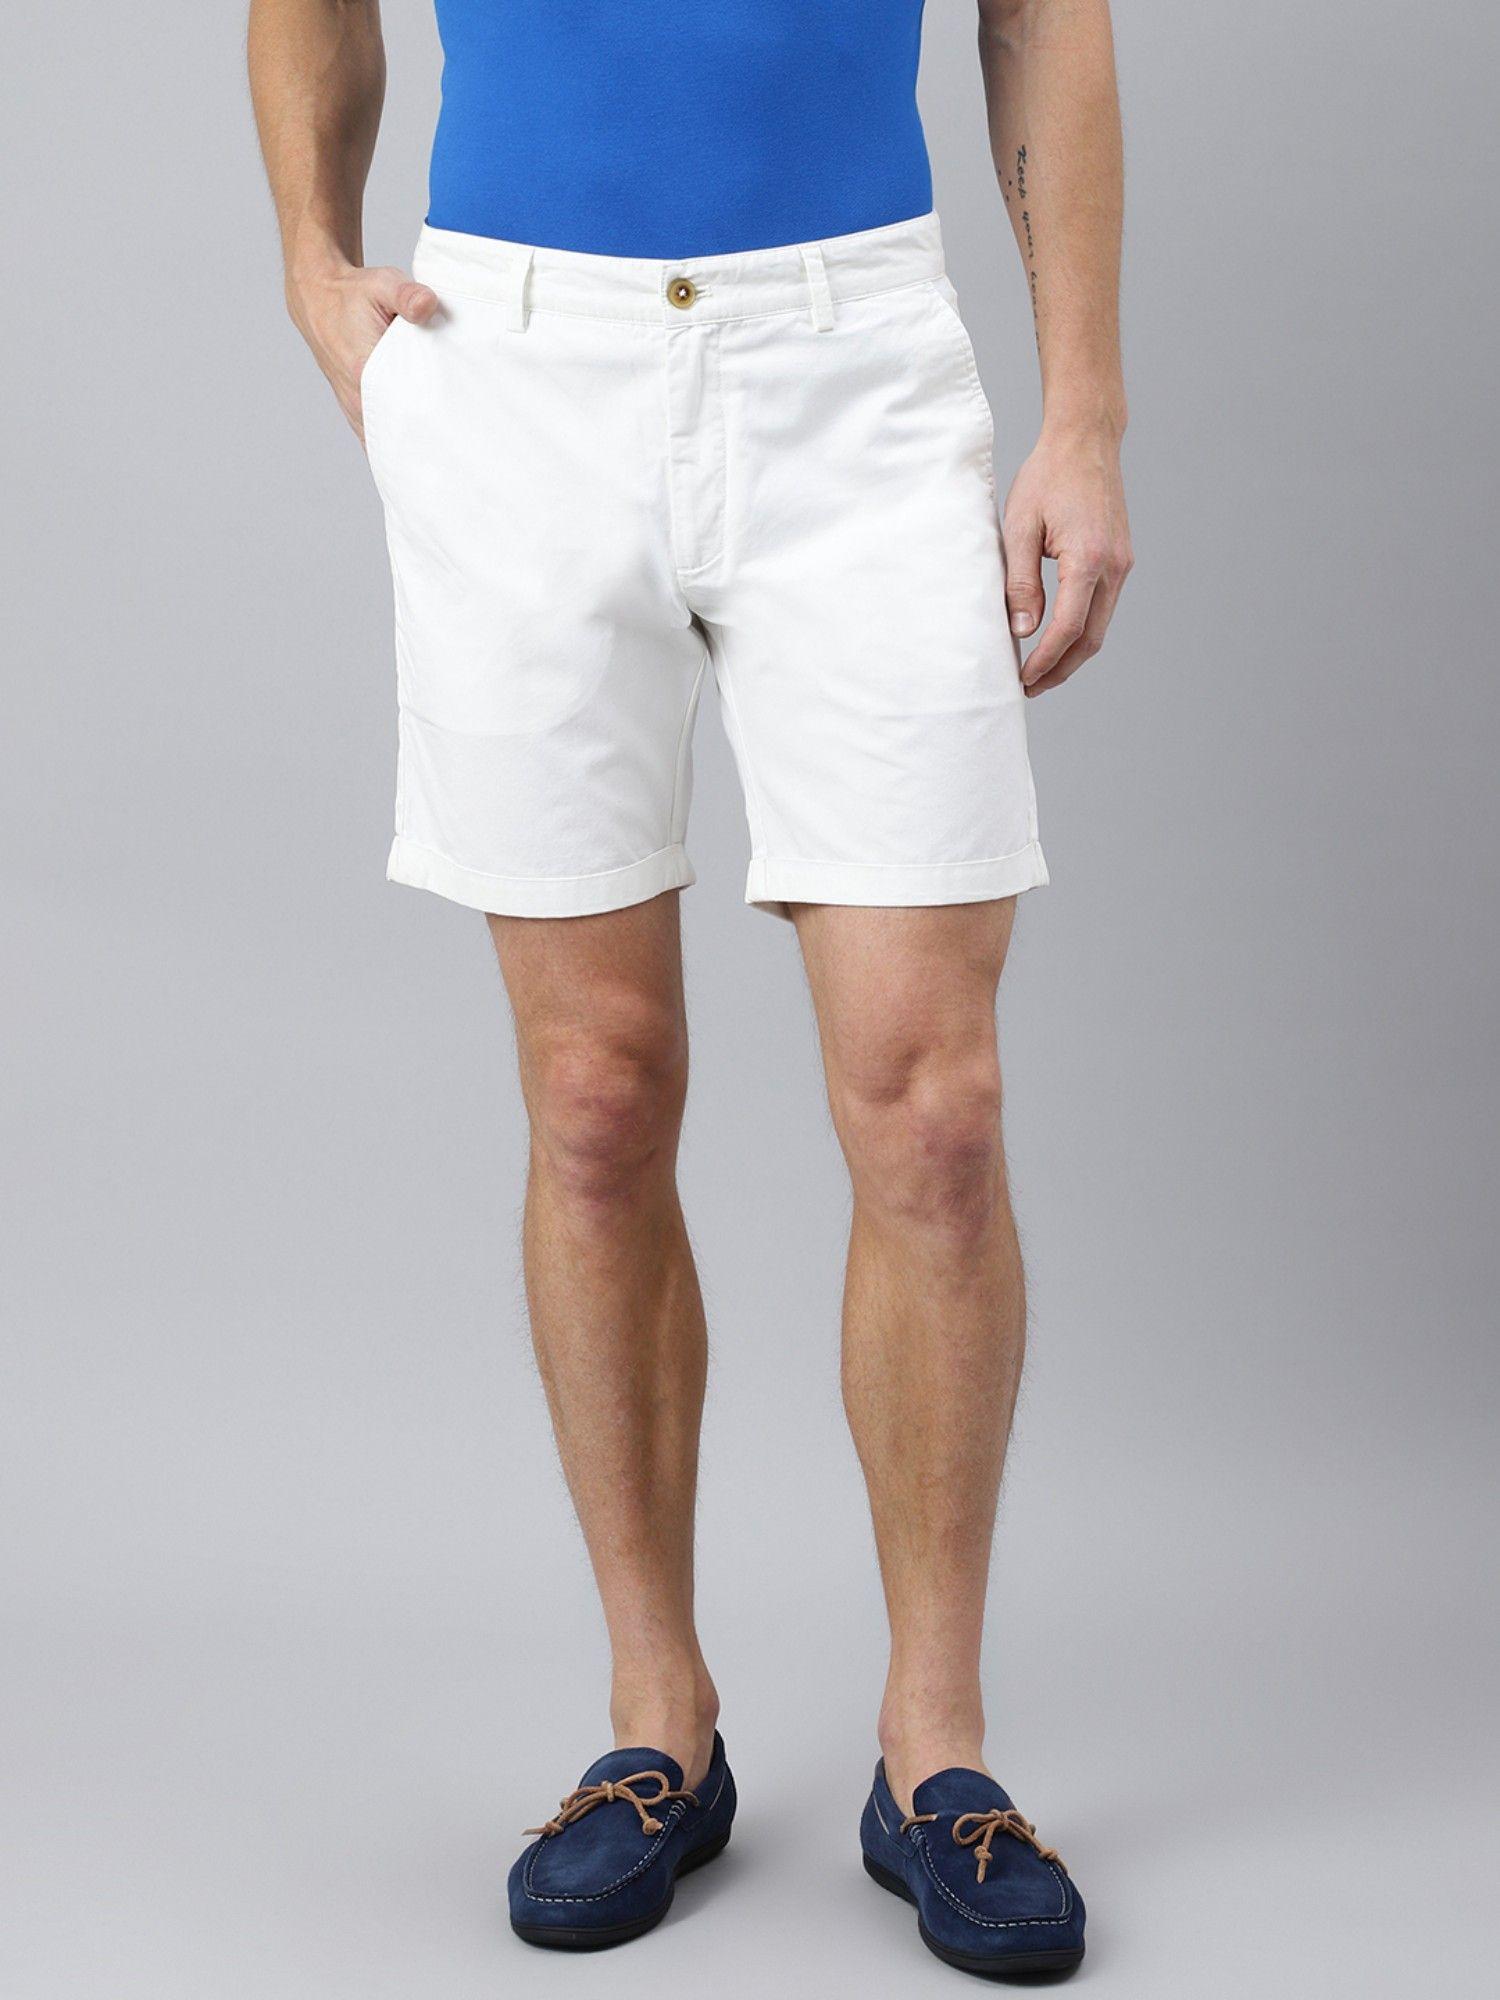 white solid shorts